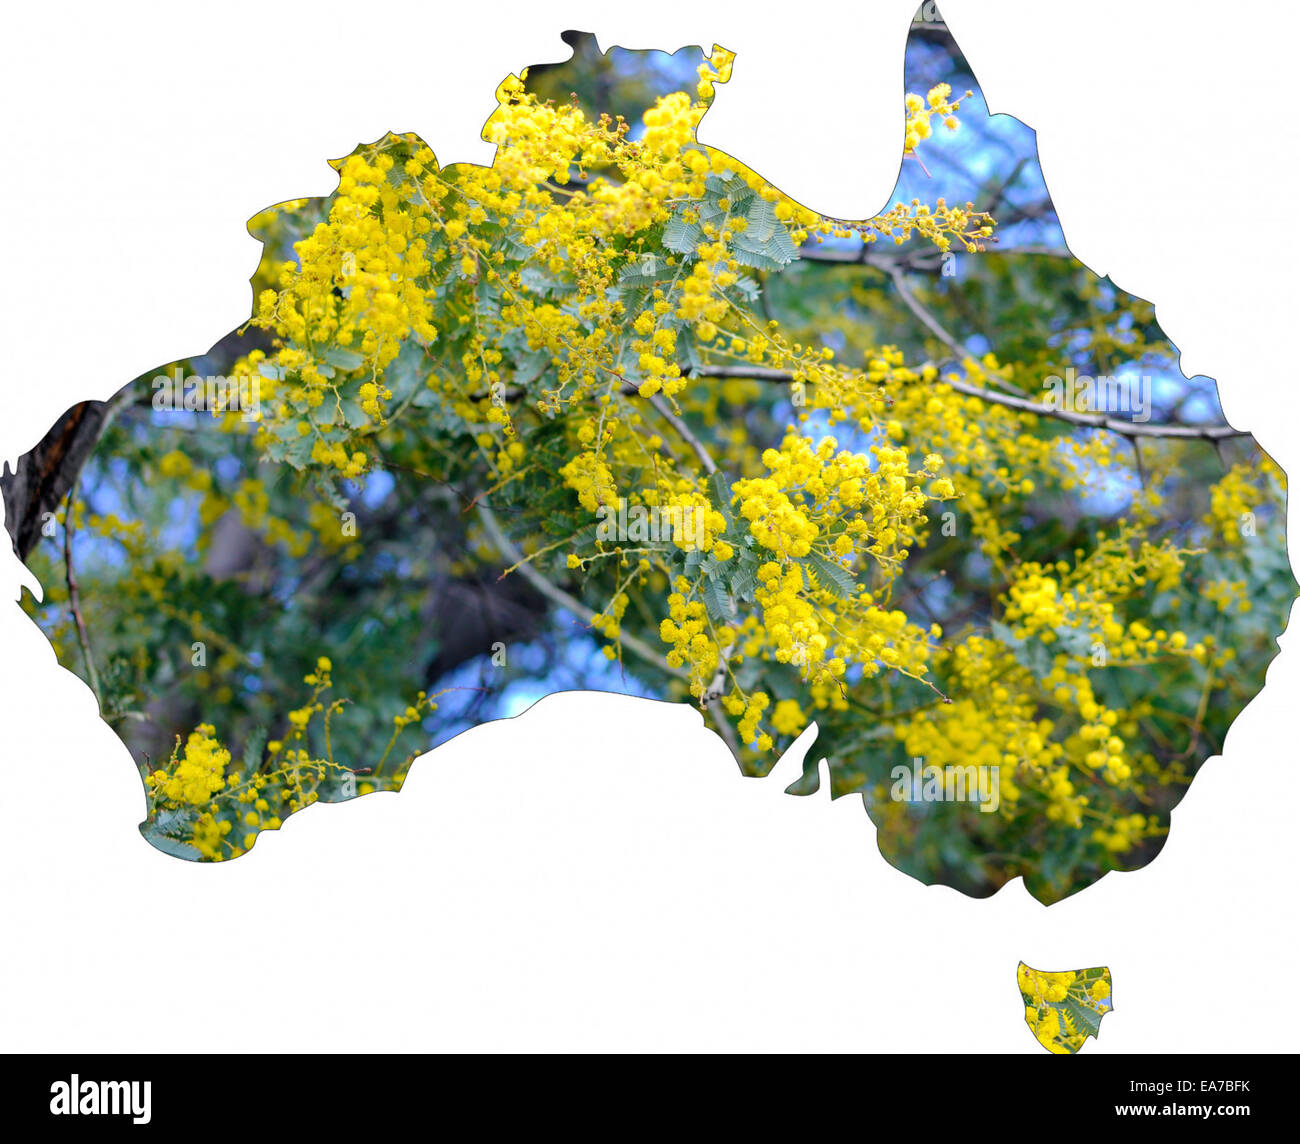 Map of Australia with wattle tree in flower, the national floral emblem of Australia. Stock Photo